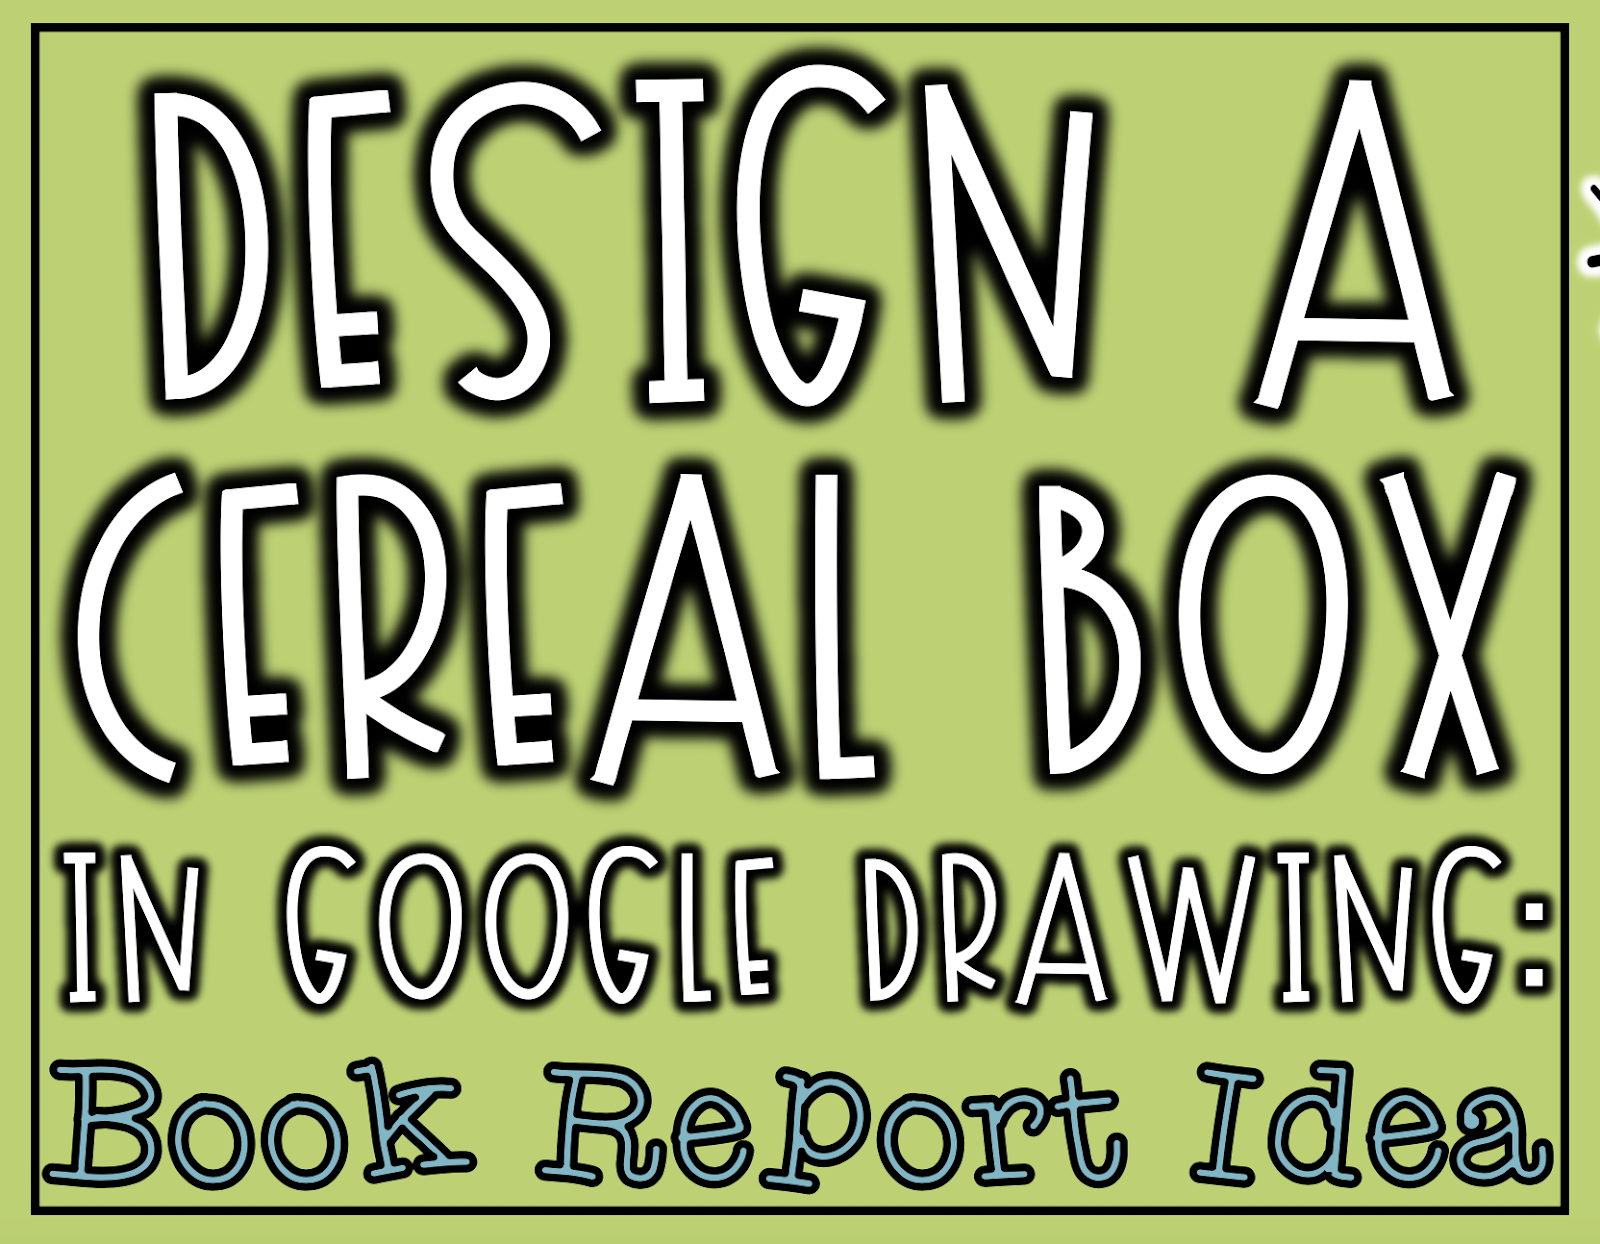 Design A Cereal Box In Google Drawing: Book Report Idea Intended For Cereal Box Book Report Template